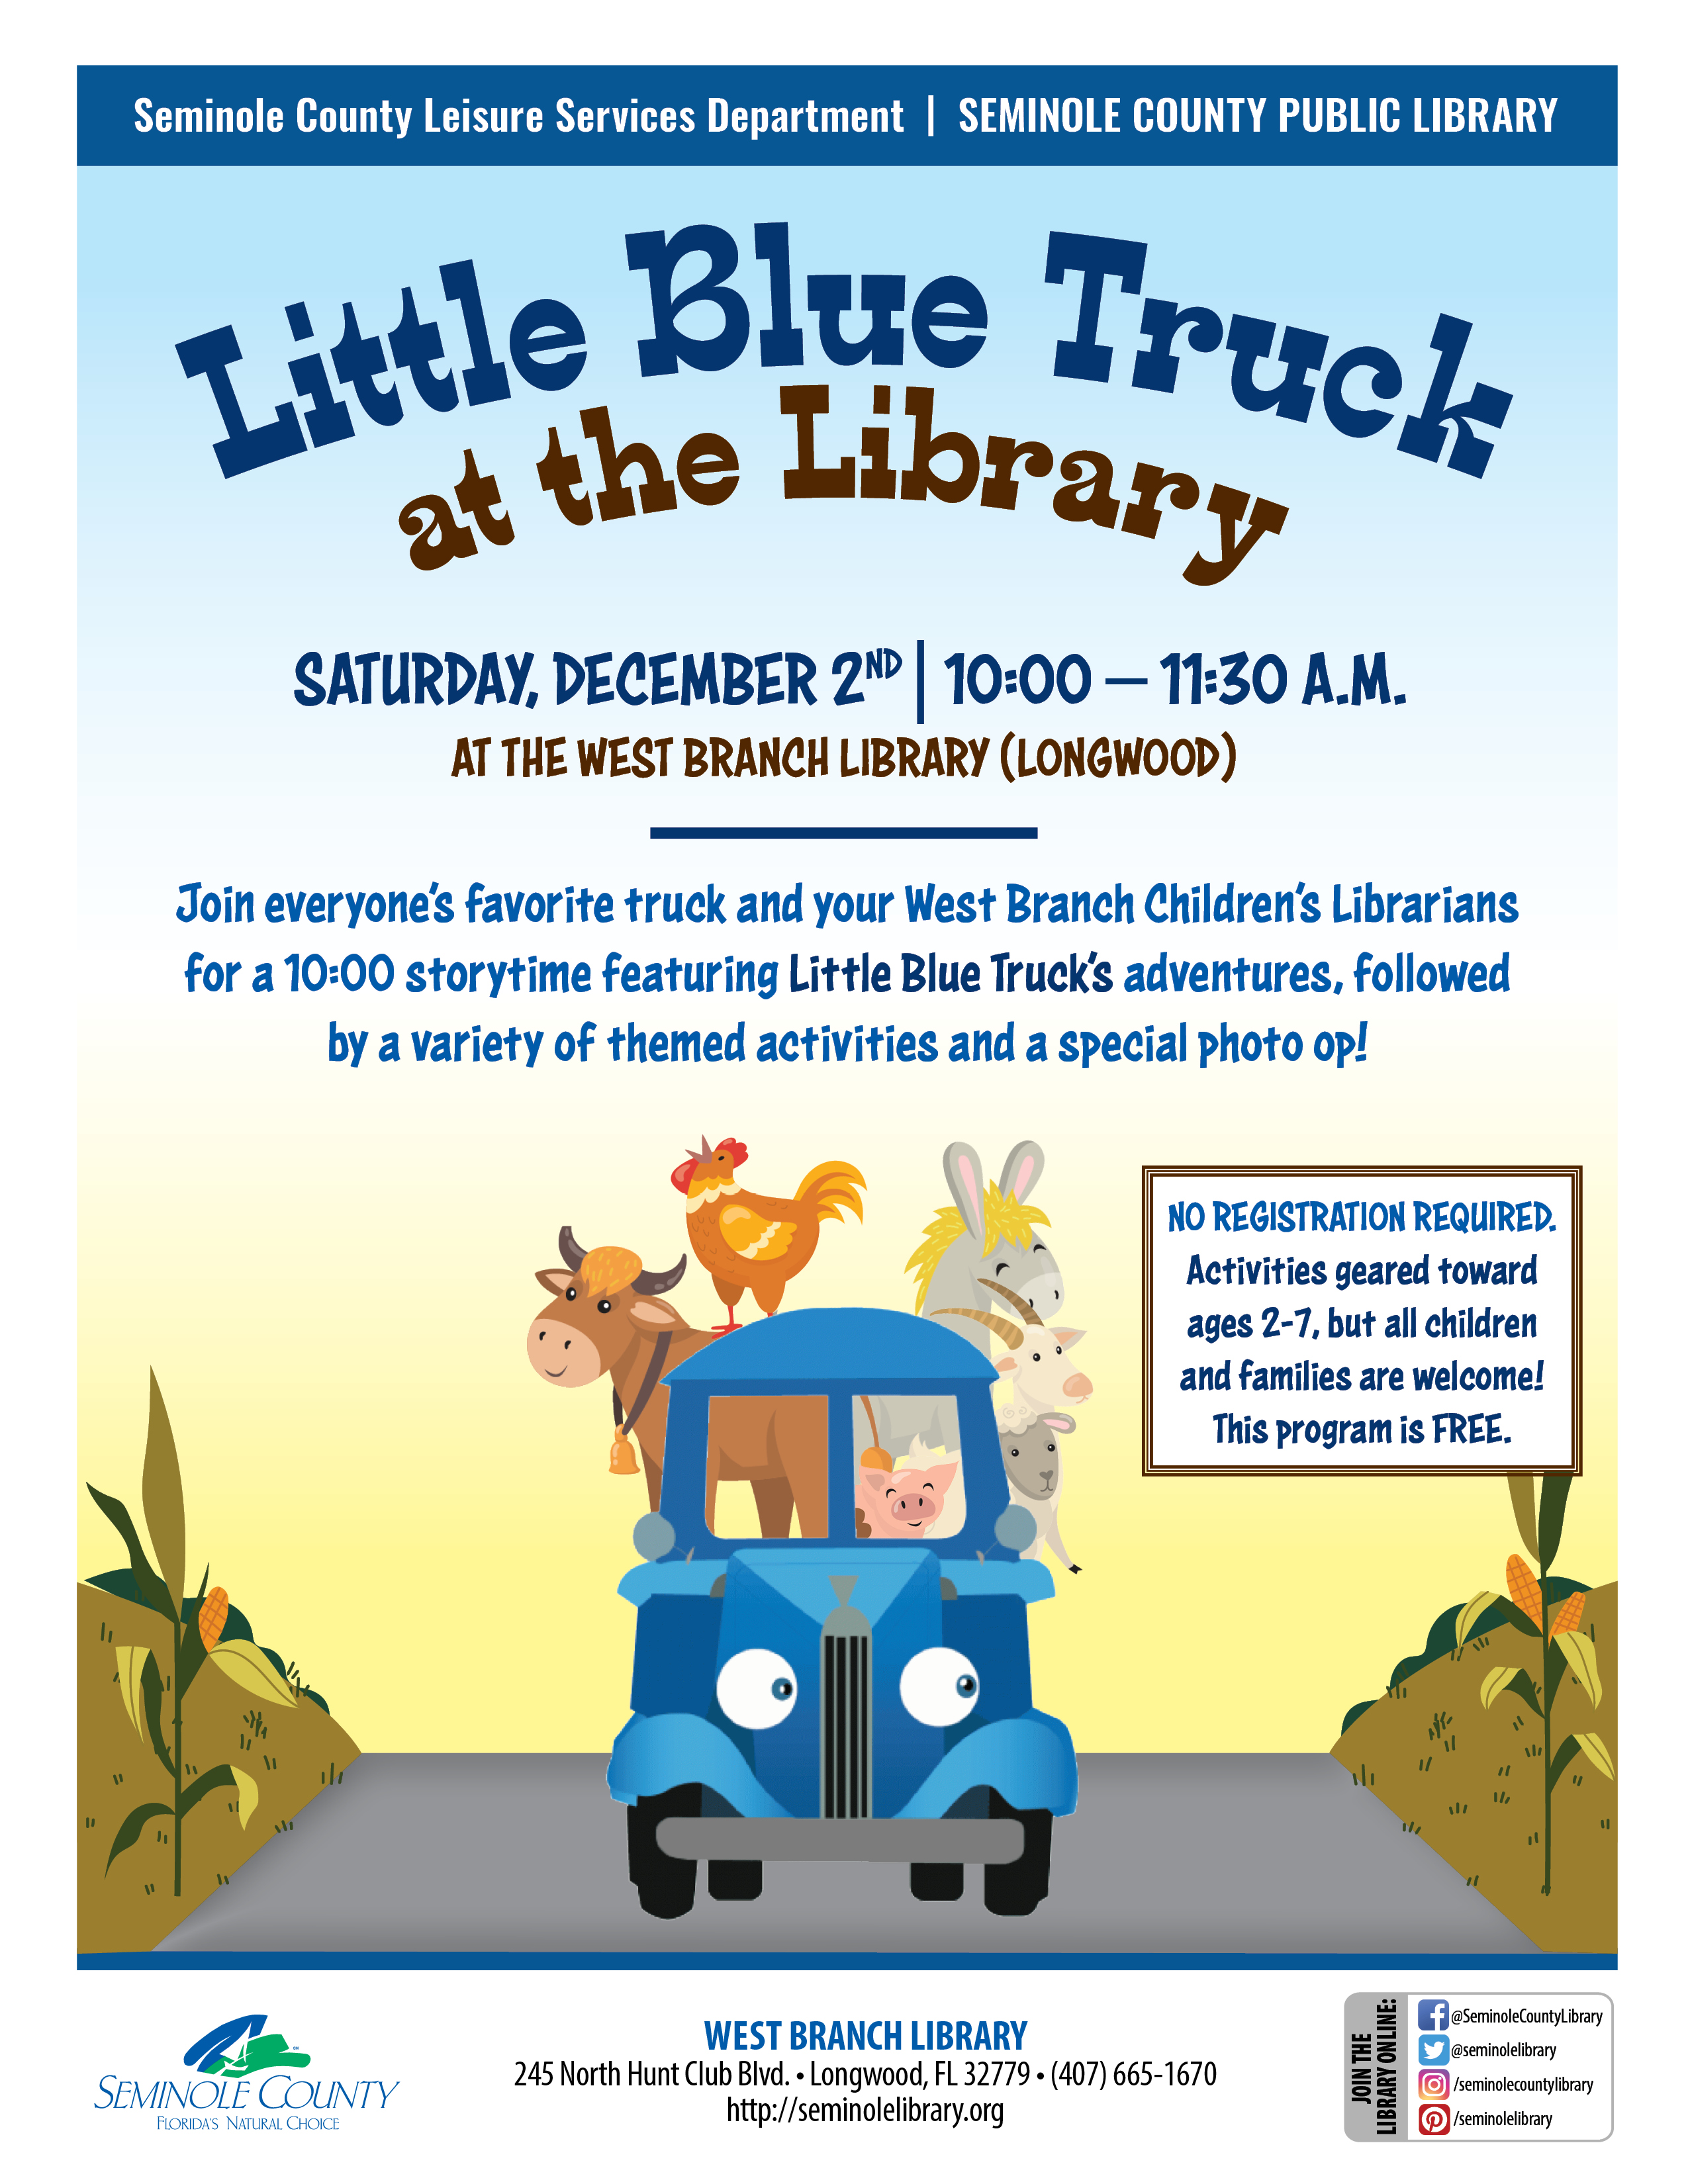 Little Blue Truck at the West Branch Library